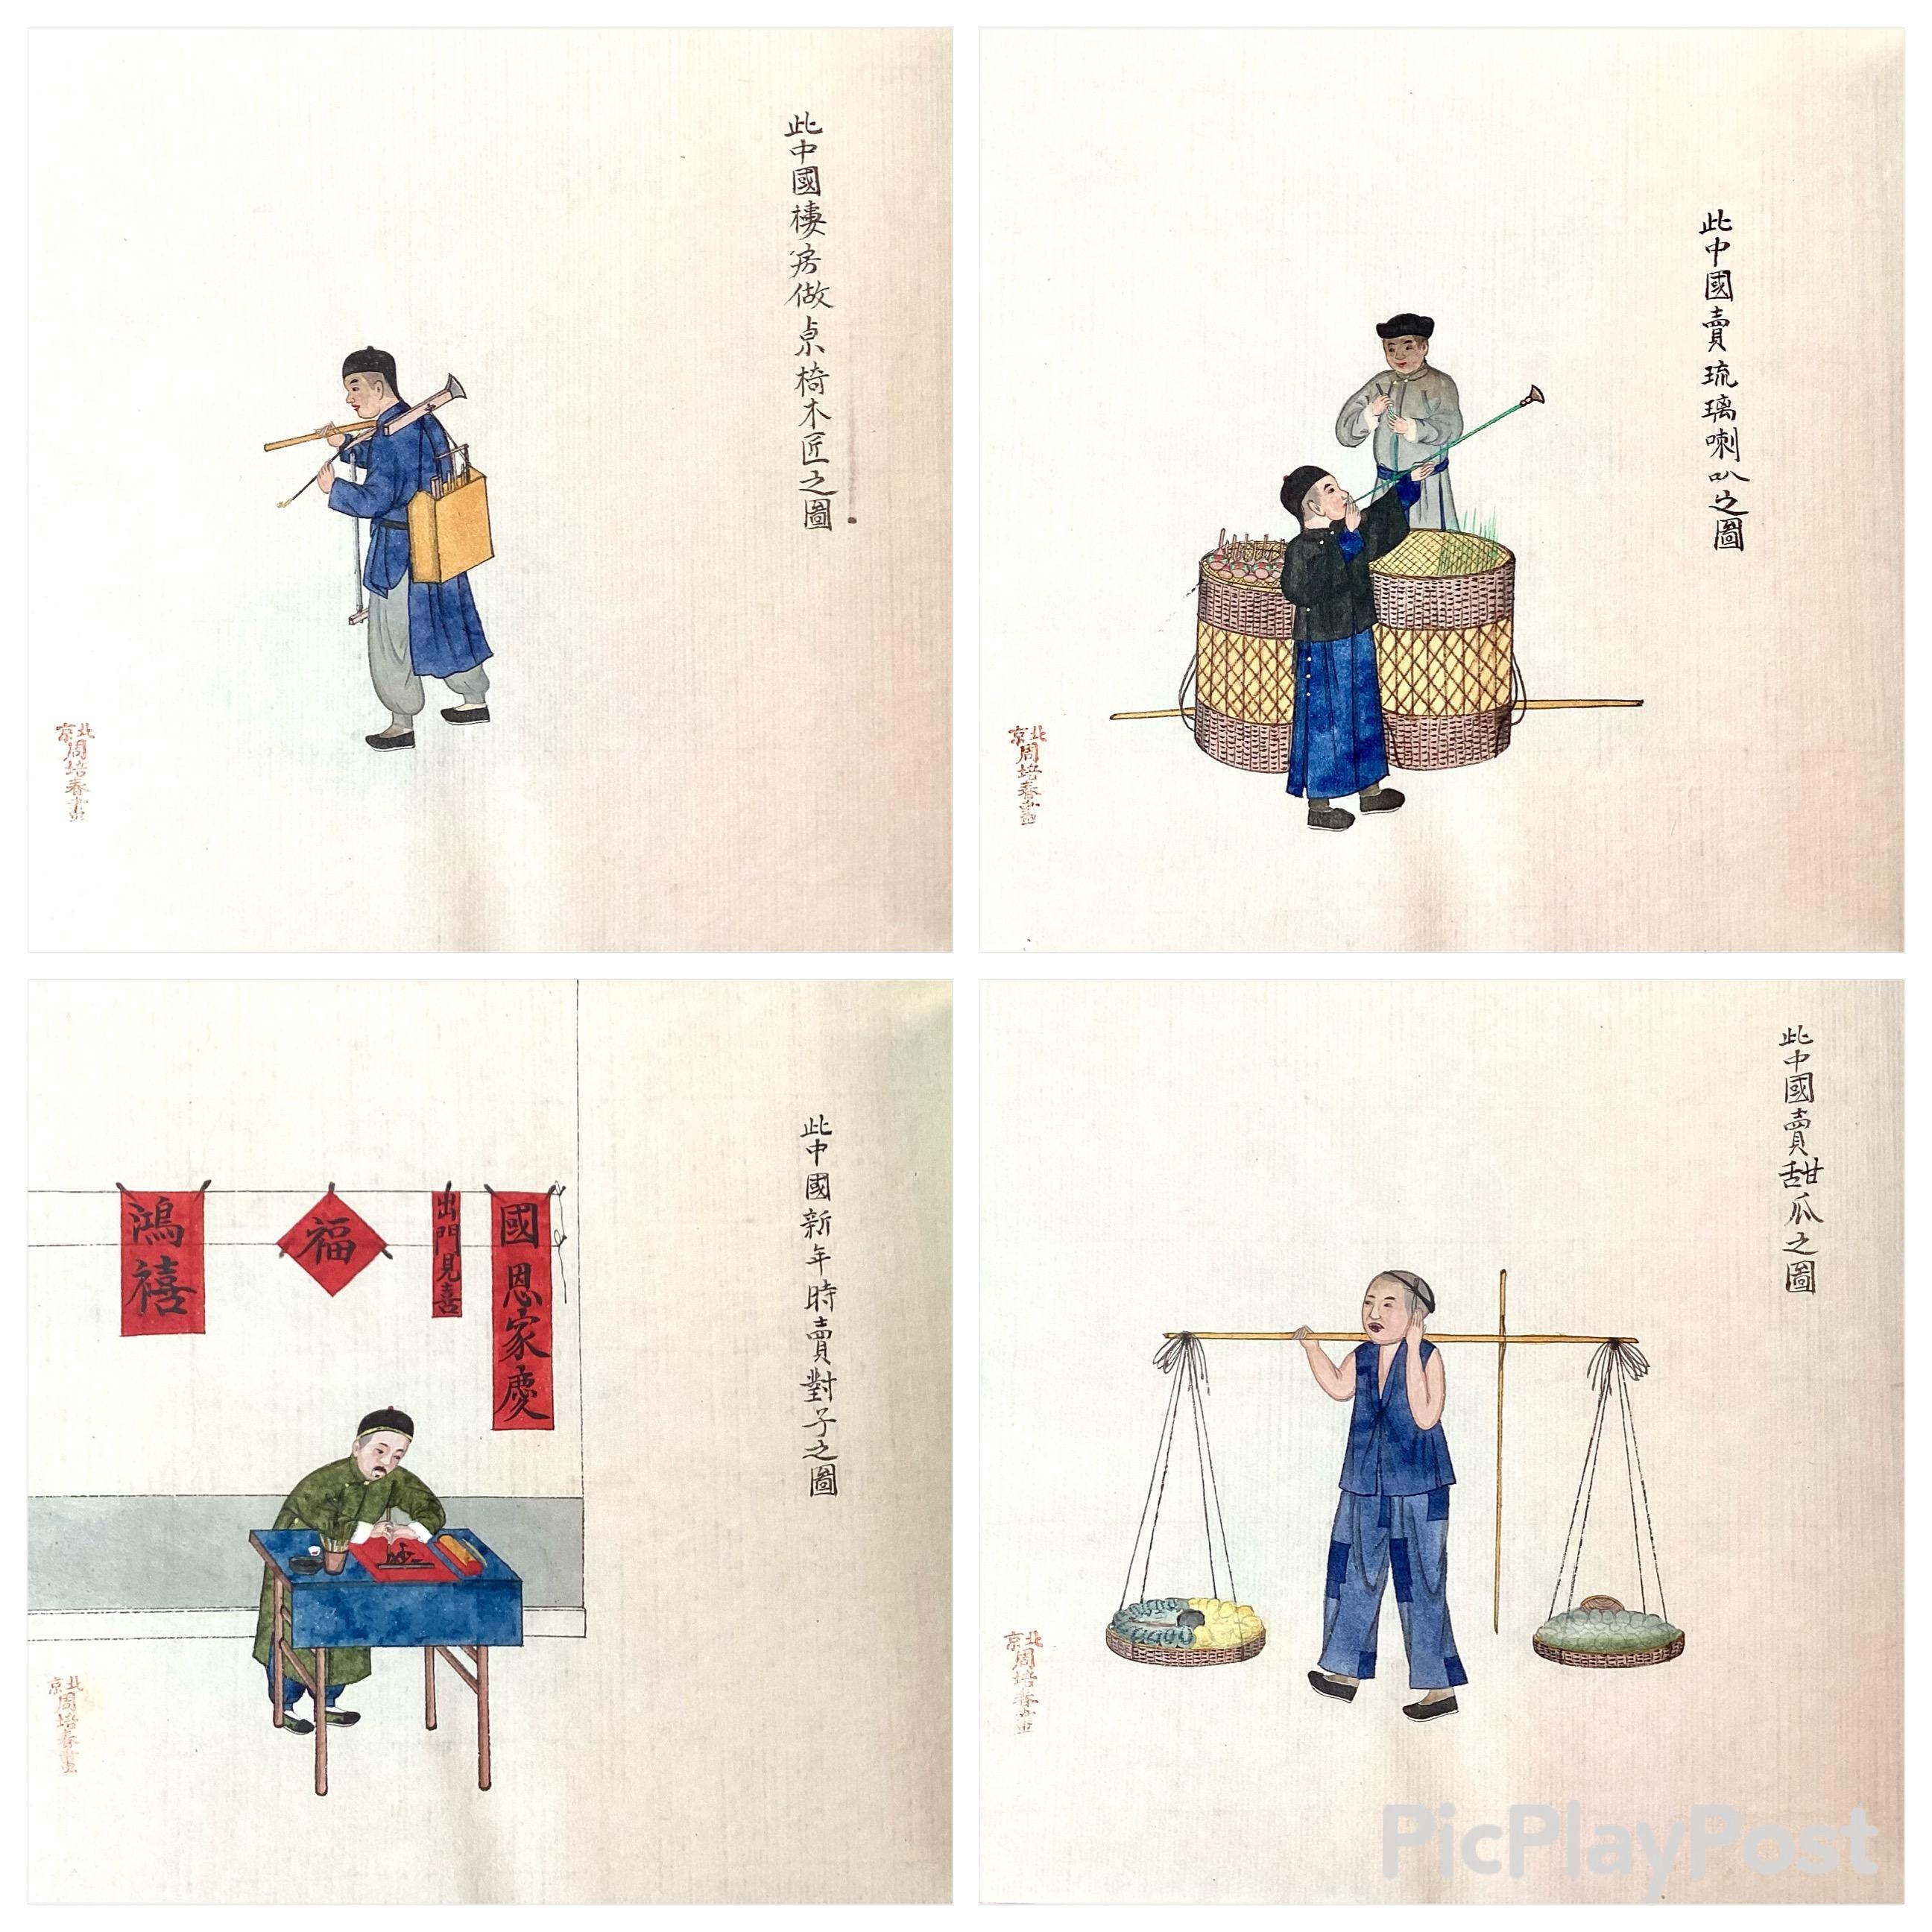 Rare Chinese Export School. 24 miniatures in watercolor and bodycolor on pith paper. Album of pith paintings depicting trades and professions. 19th century Chinese, bound with silk thread. Each painting has drawings of peasant figural life scenes,